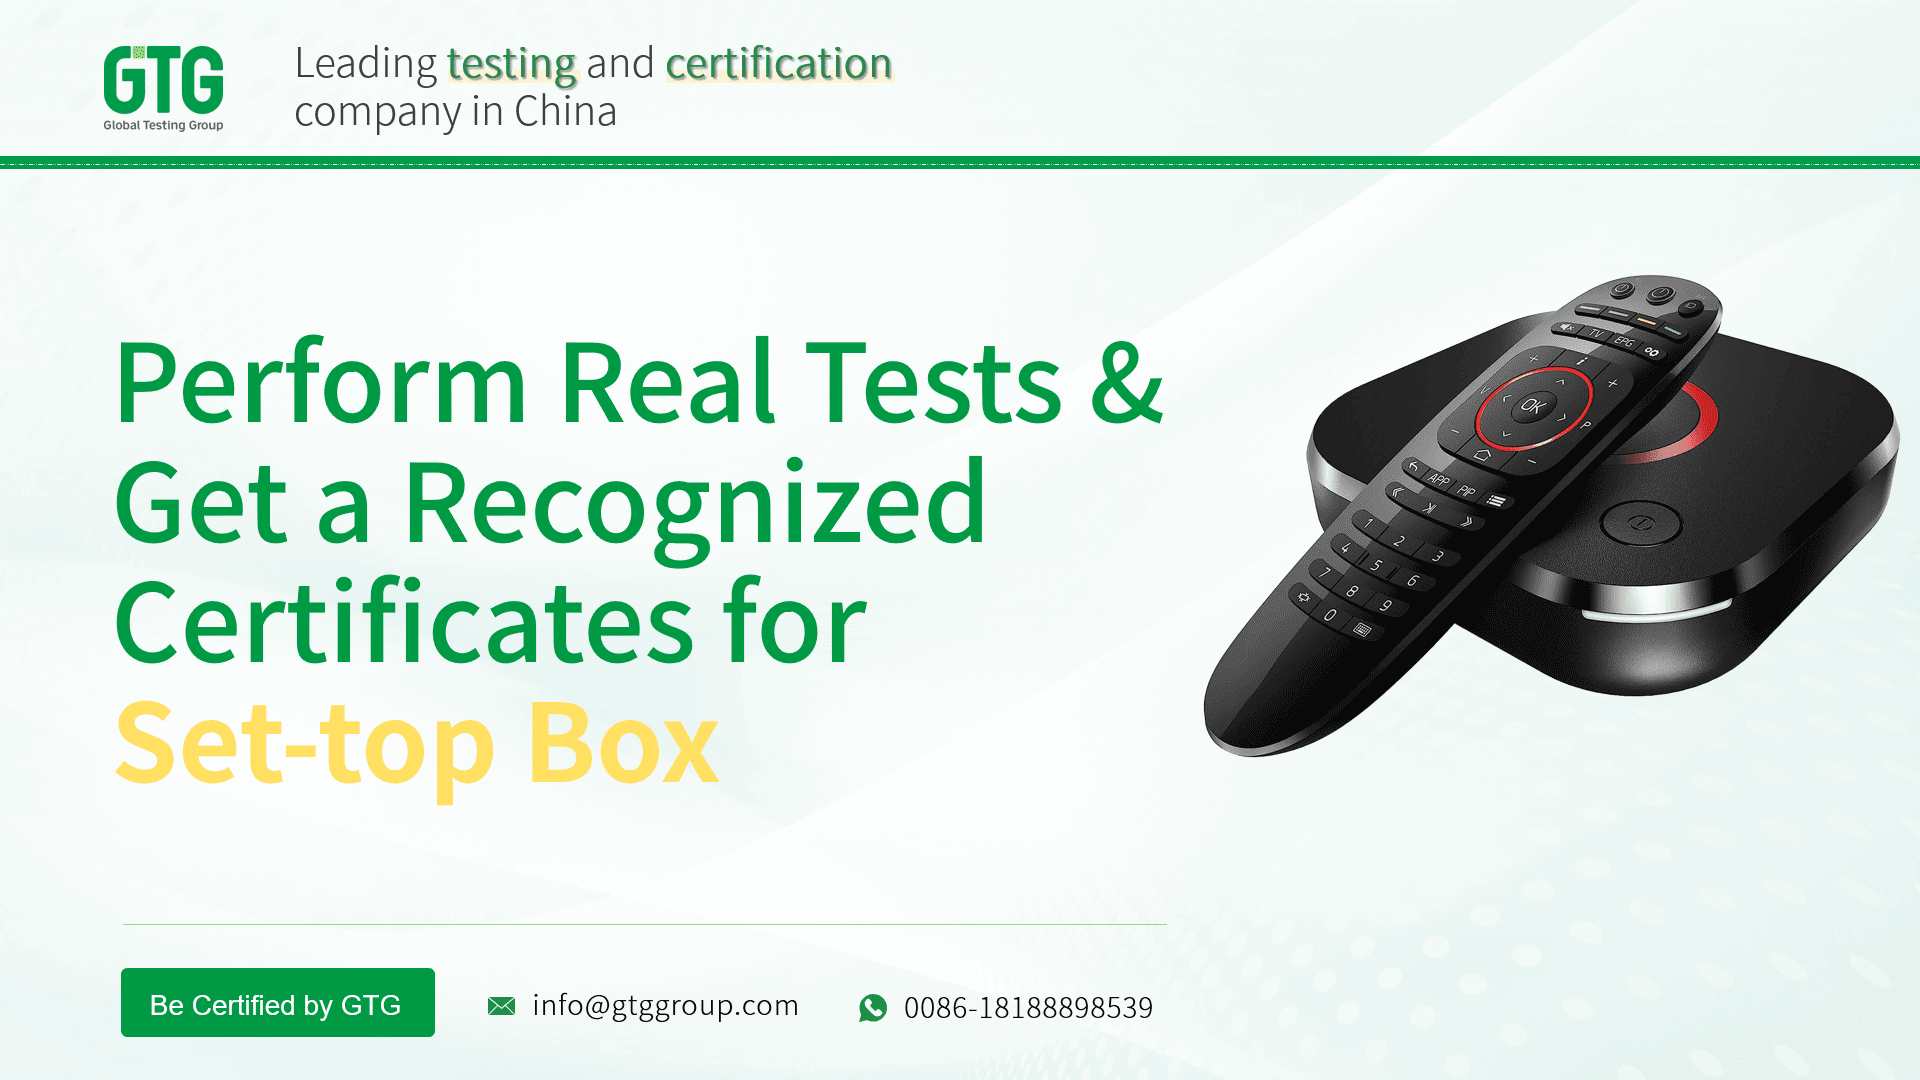 Get Test Report and Certifications for Set Top Box from GTG Group